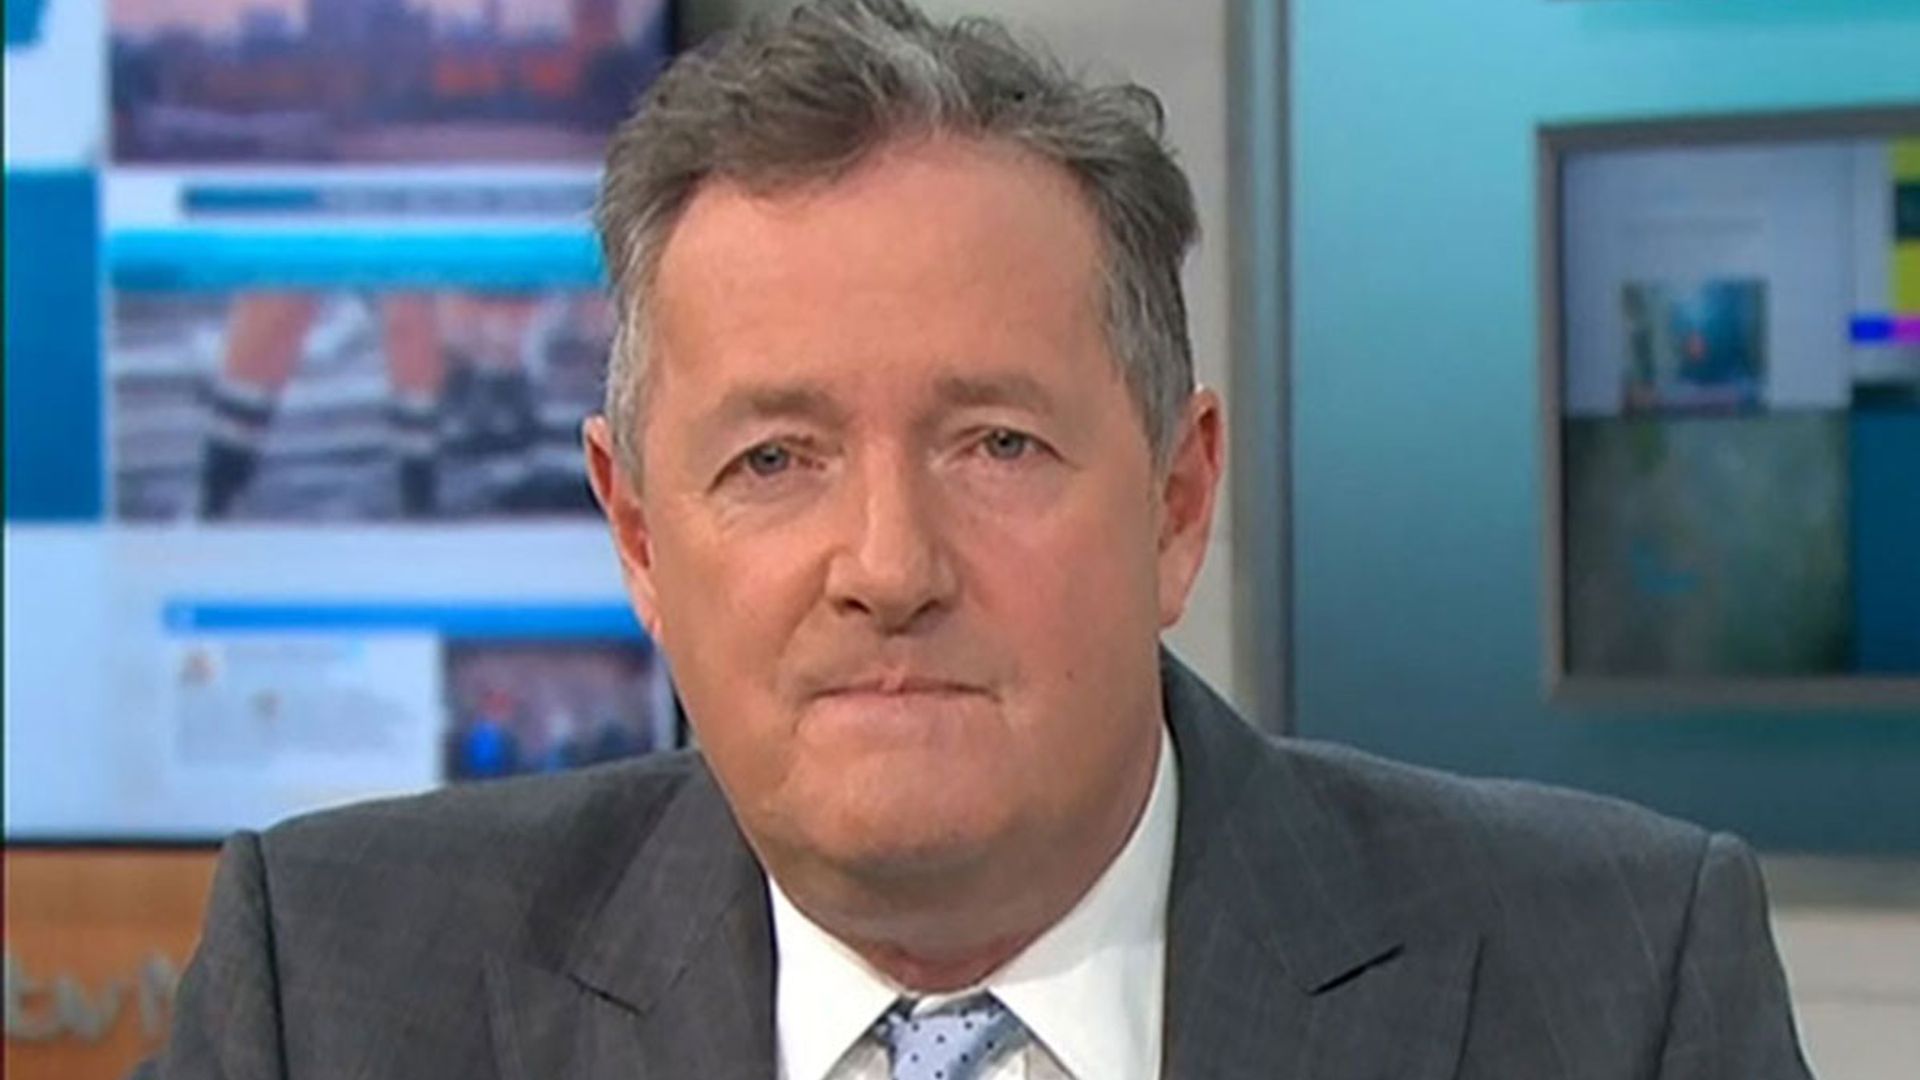 Piers Morgan shares emotional tribute over the loss of beloved GMB guest